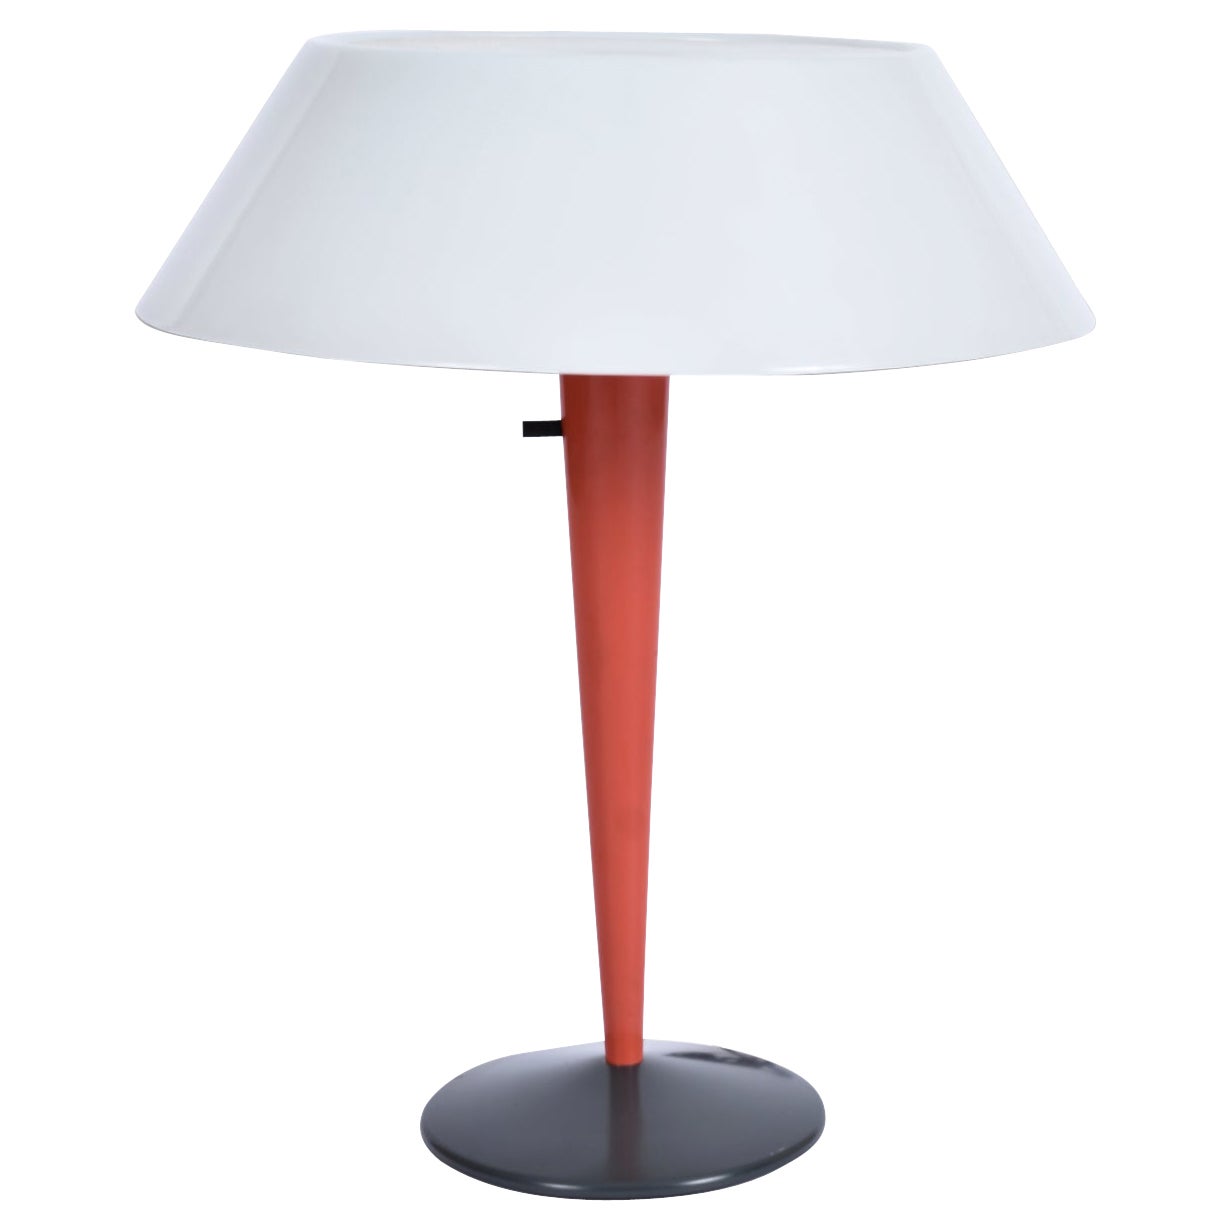 Lightolier Cone Shaped Mauve Color Table Lamp with Mushroom Shade